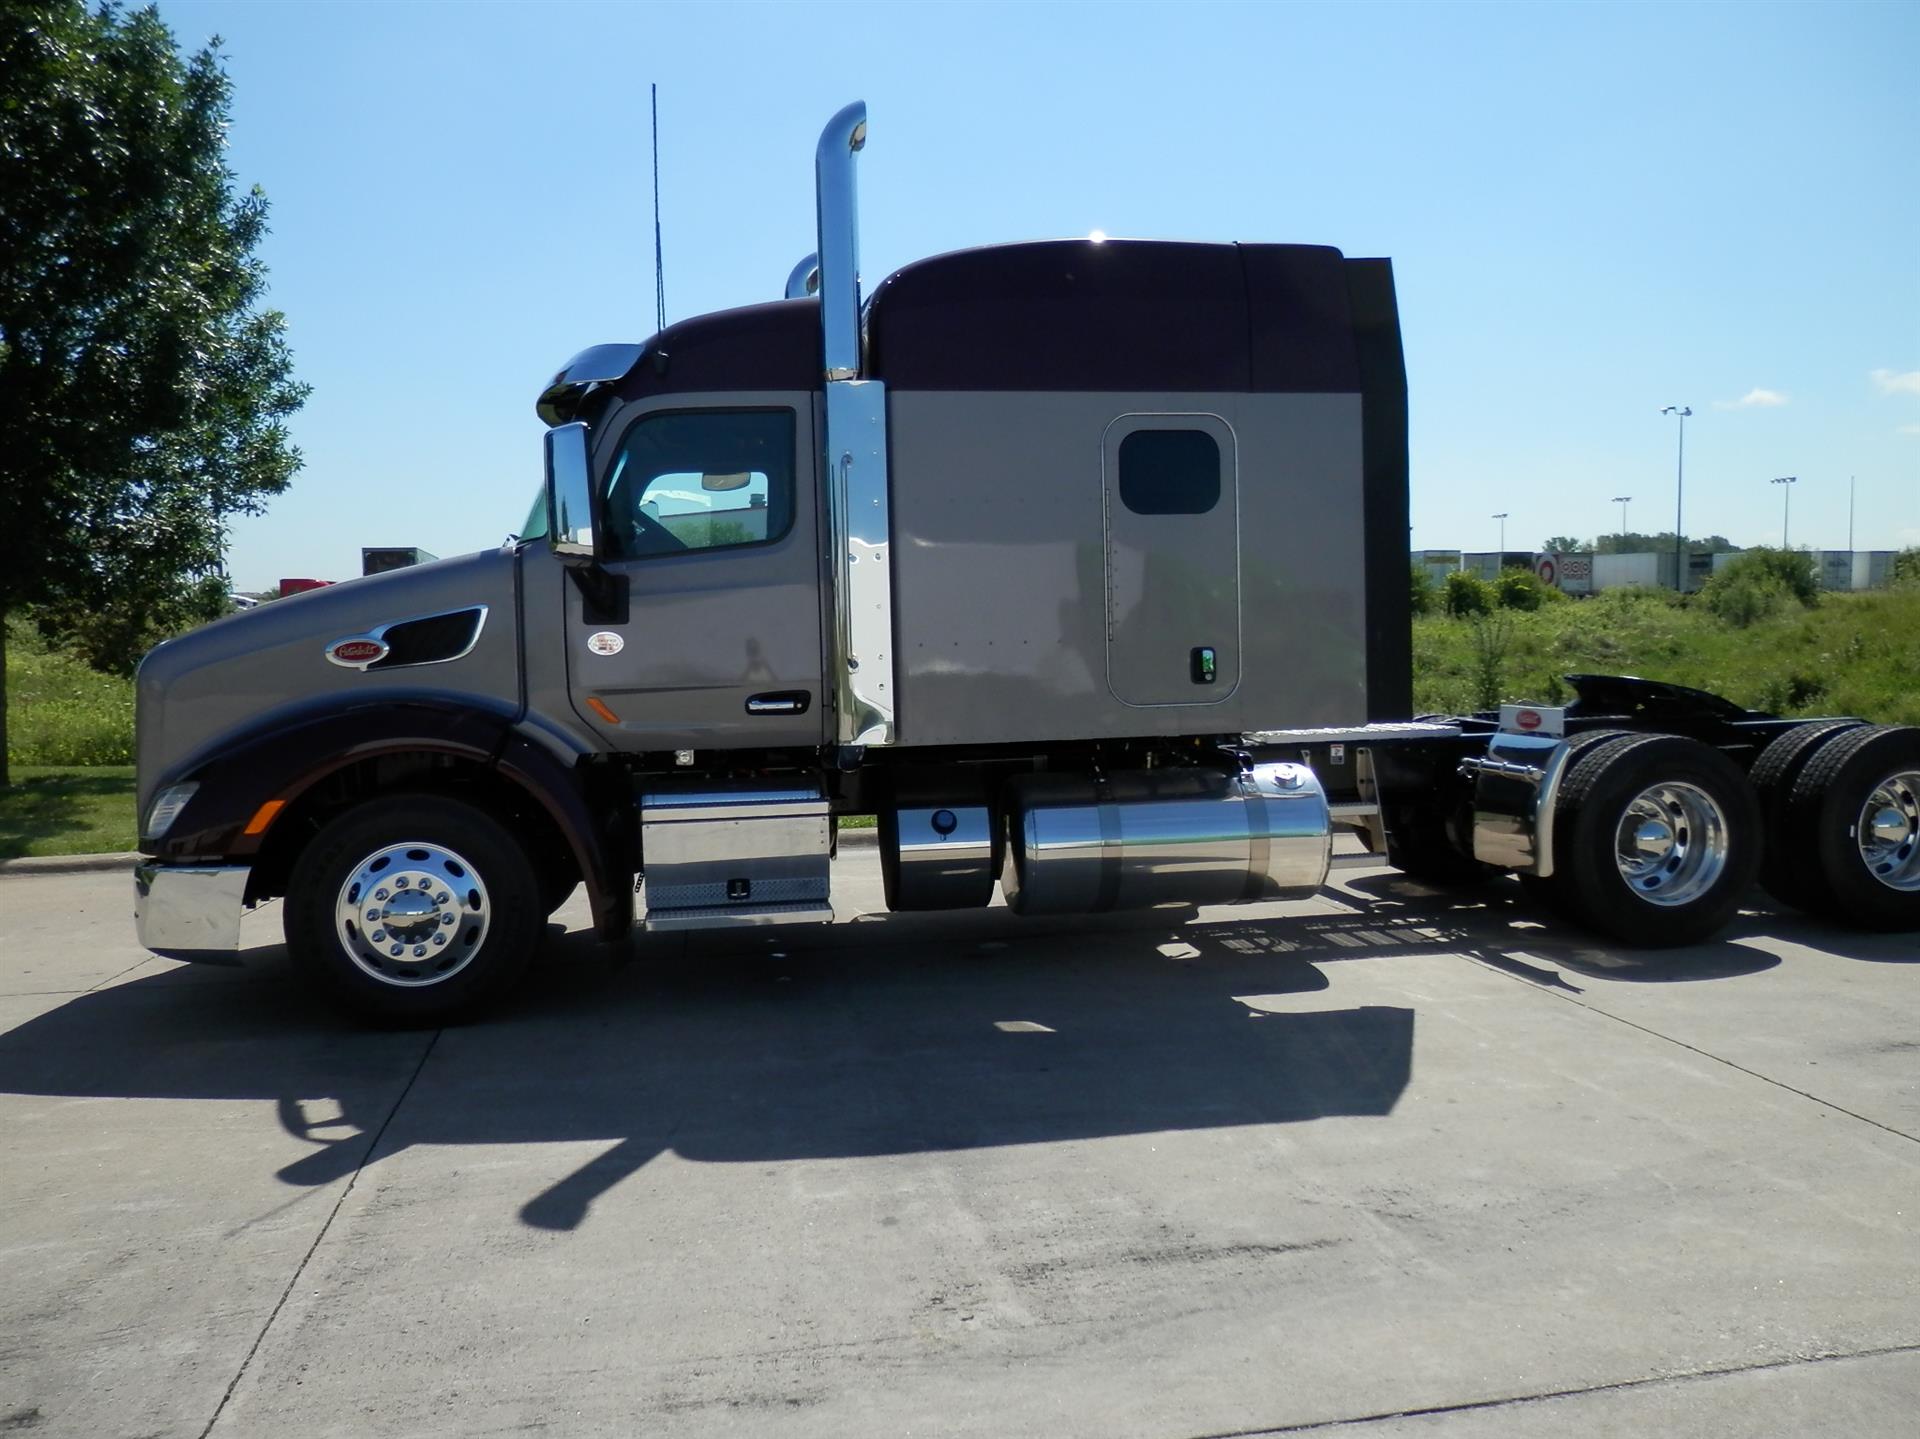 Contact Quad City Peterbilt Paclease for your rental today.